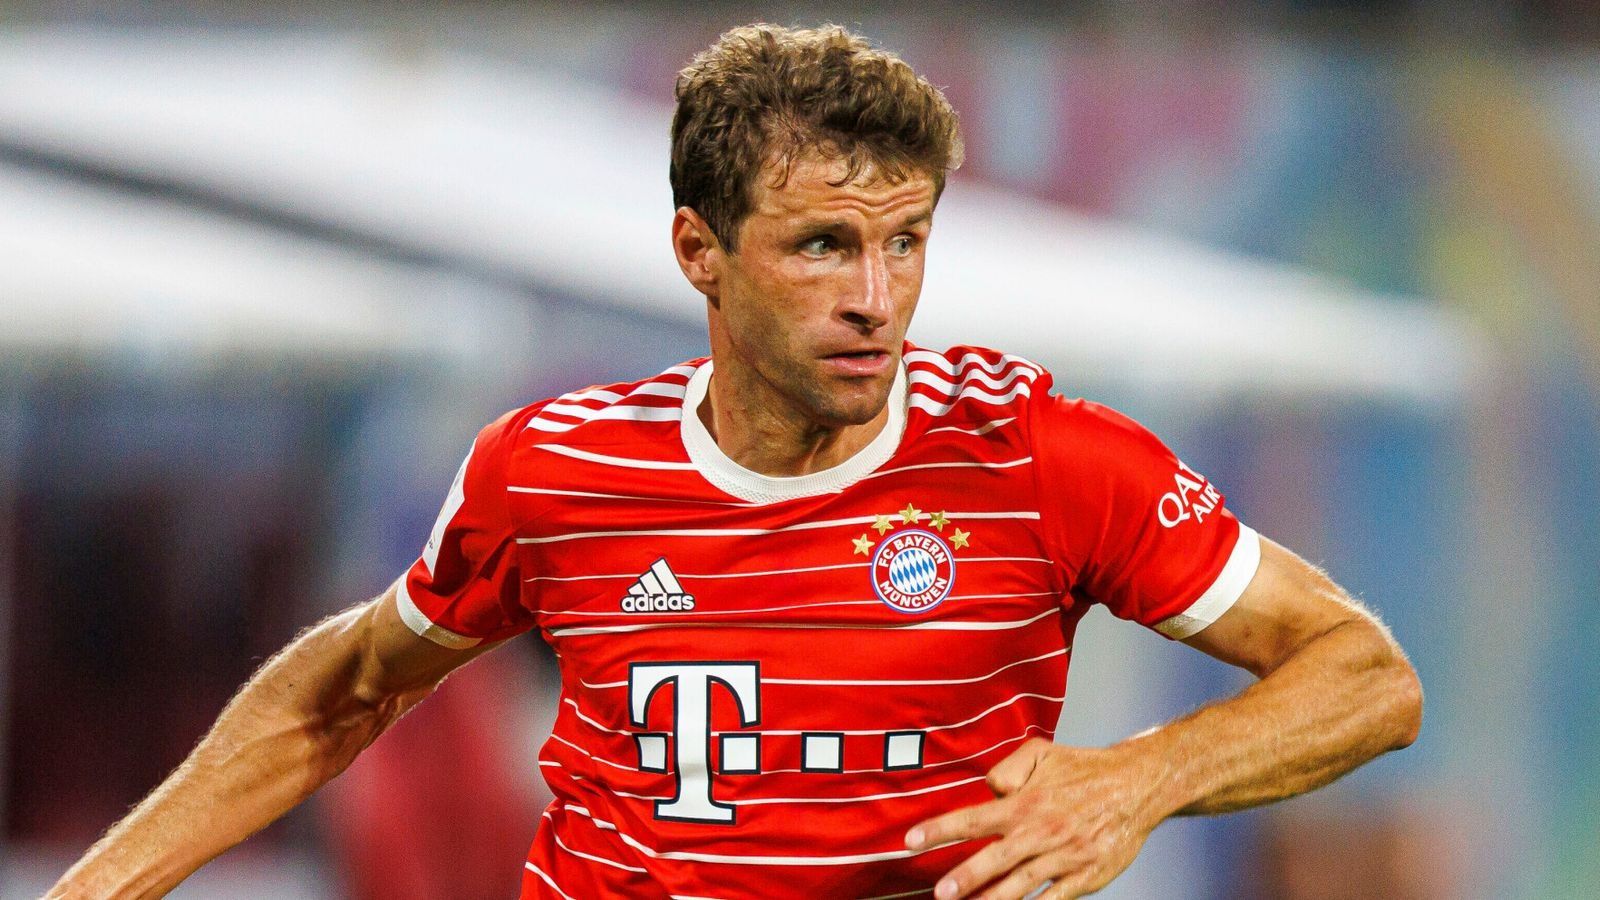 Bayern Legend Muller Extends His Contract Until 2025